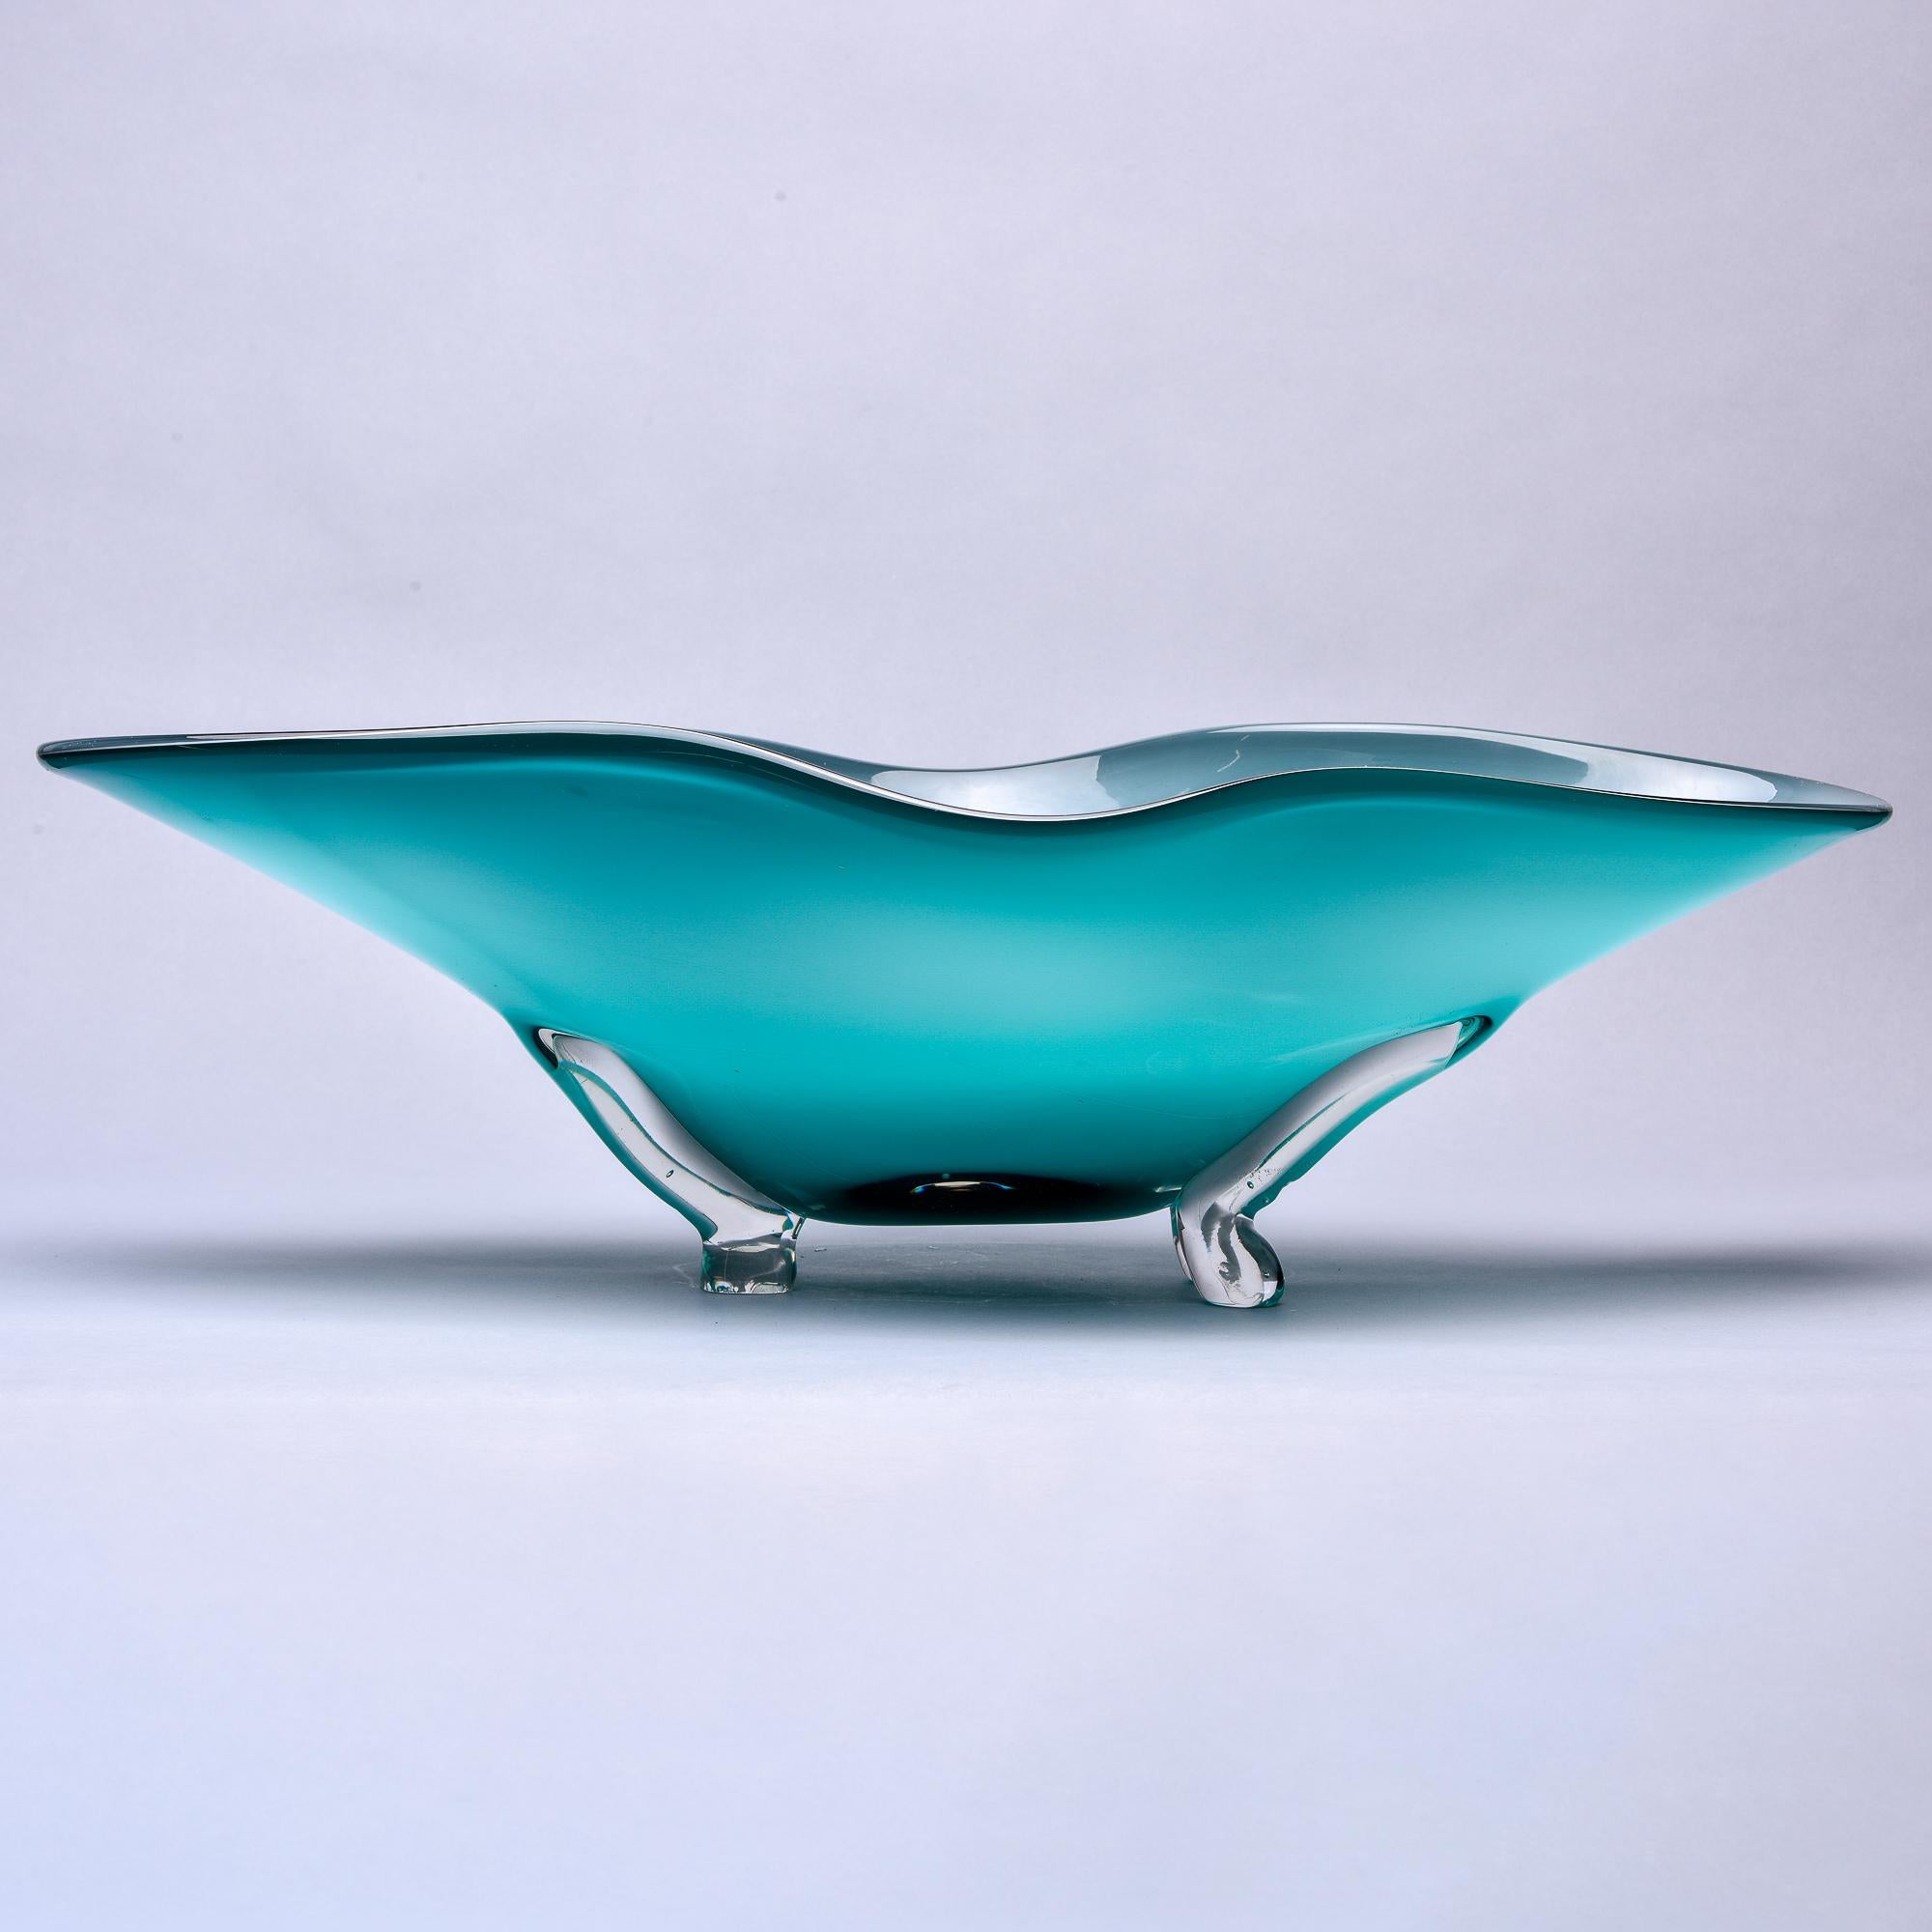 Found in Italy, this circa 1994 extra large Murano glass center bowl has a clear footed base and wide, flared blue-green bowl that is 26” wide. Unknown maker. Etched Murano 1994 on underside of base.